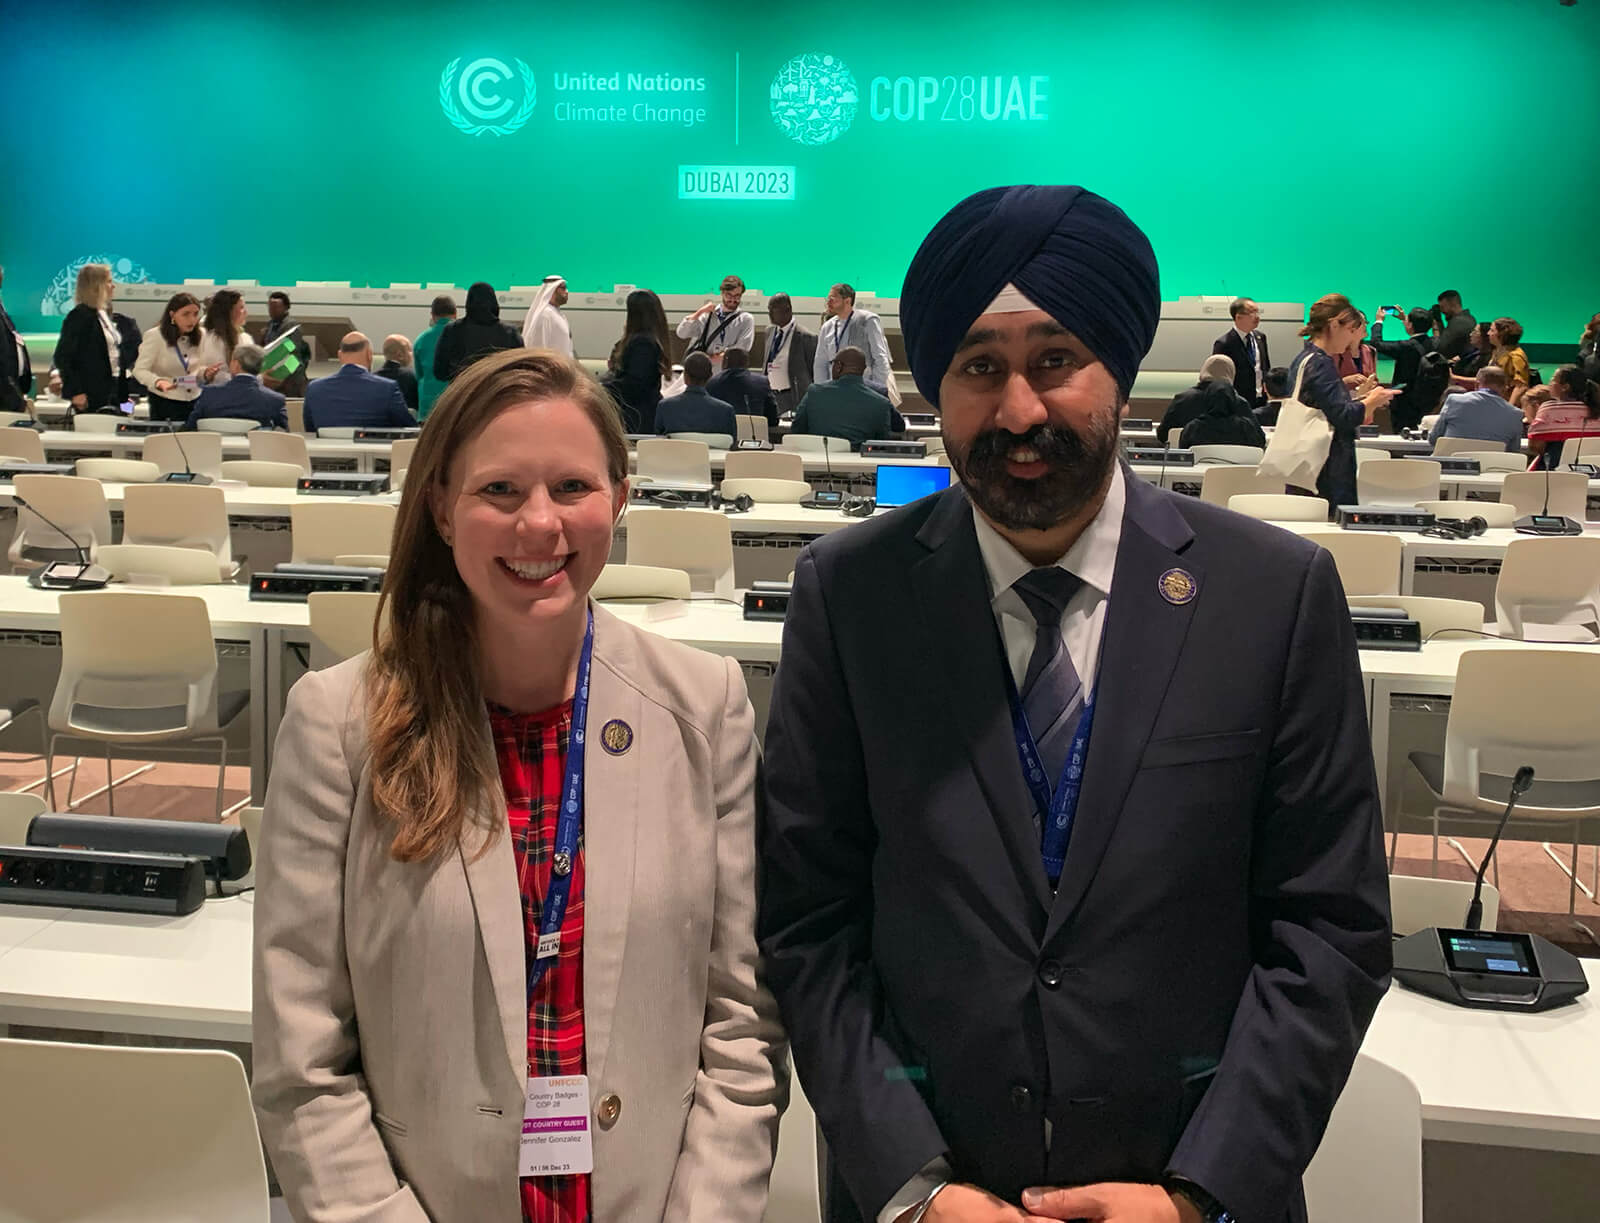 Jennifer Gonzalez stands with Mayor Ravi Bhalla at the UN Climate Change Conference, with conference tables facing a stage positioned behind them.